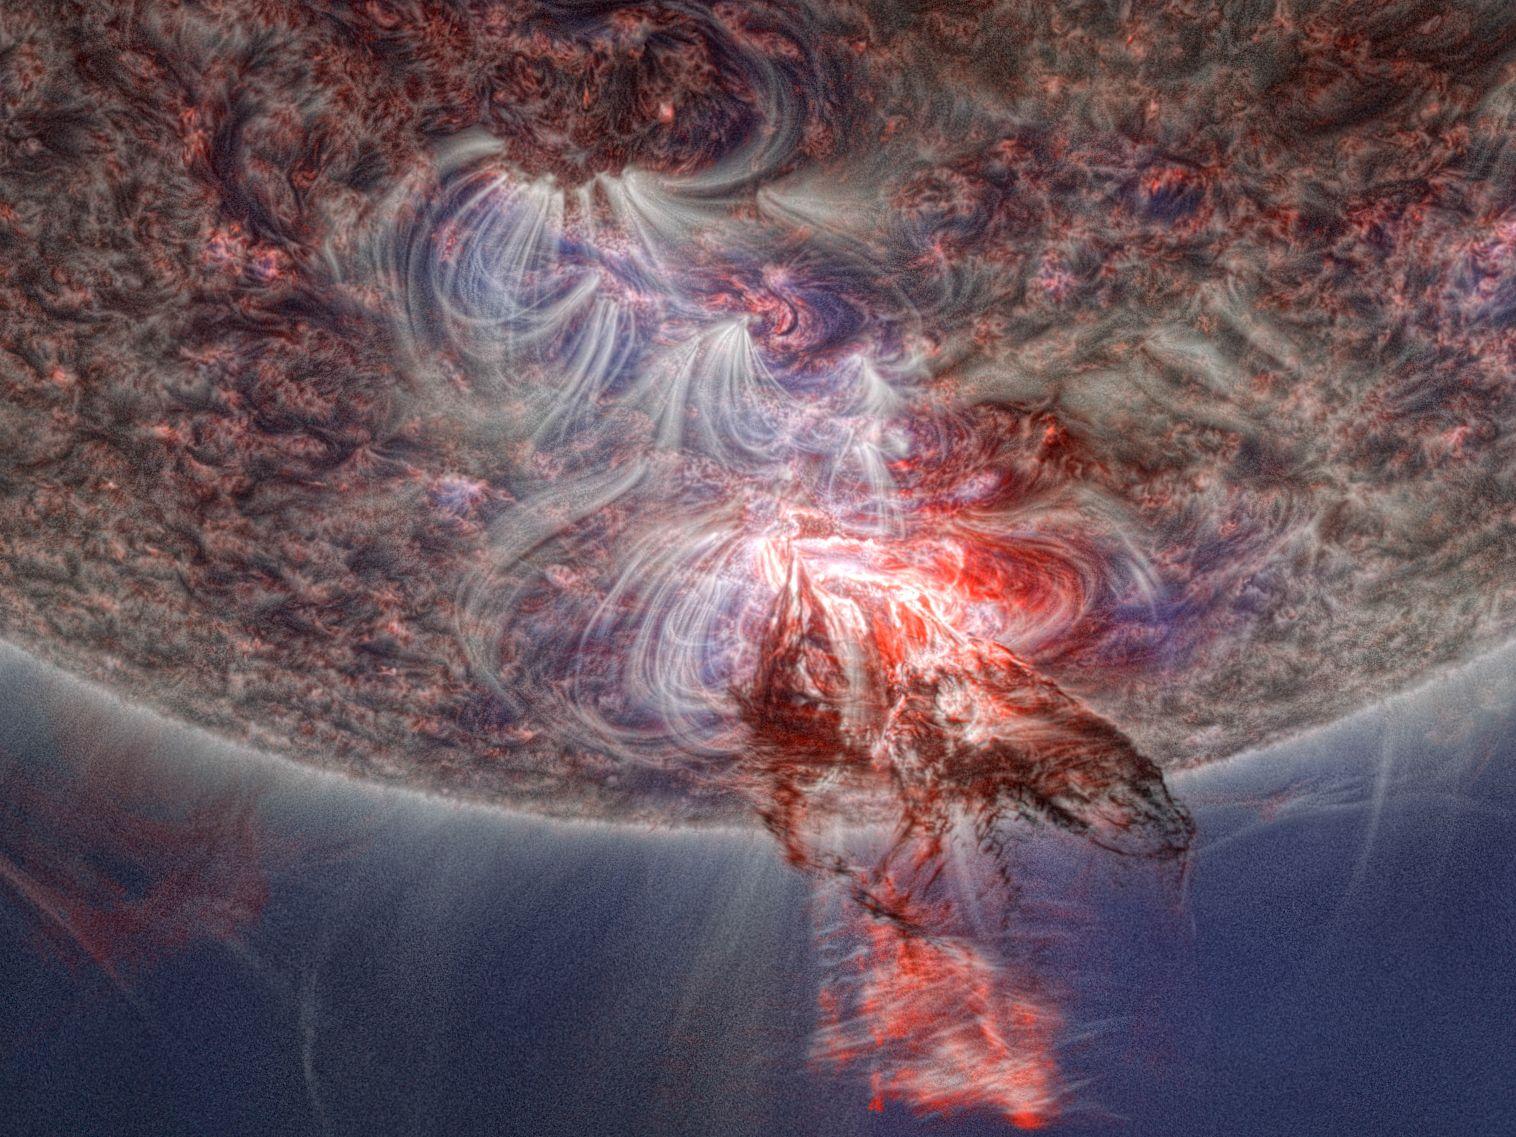 The Hong Kong Space Museum will screen a new sky show, "The Sun, Our Living Star", at its Space Theatre from tomorrow (May 1) and highlight the close relationship between the sun and humans. Picture shows explosive ejections of high-energy particles on the sun's surface, in an image from the sky show. (Source of photo: European Southern Observatory)